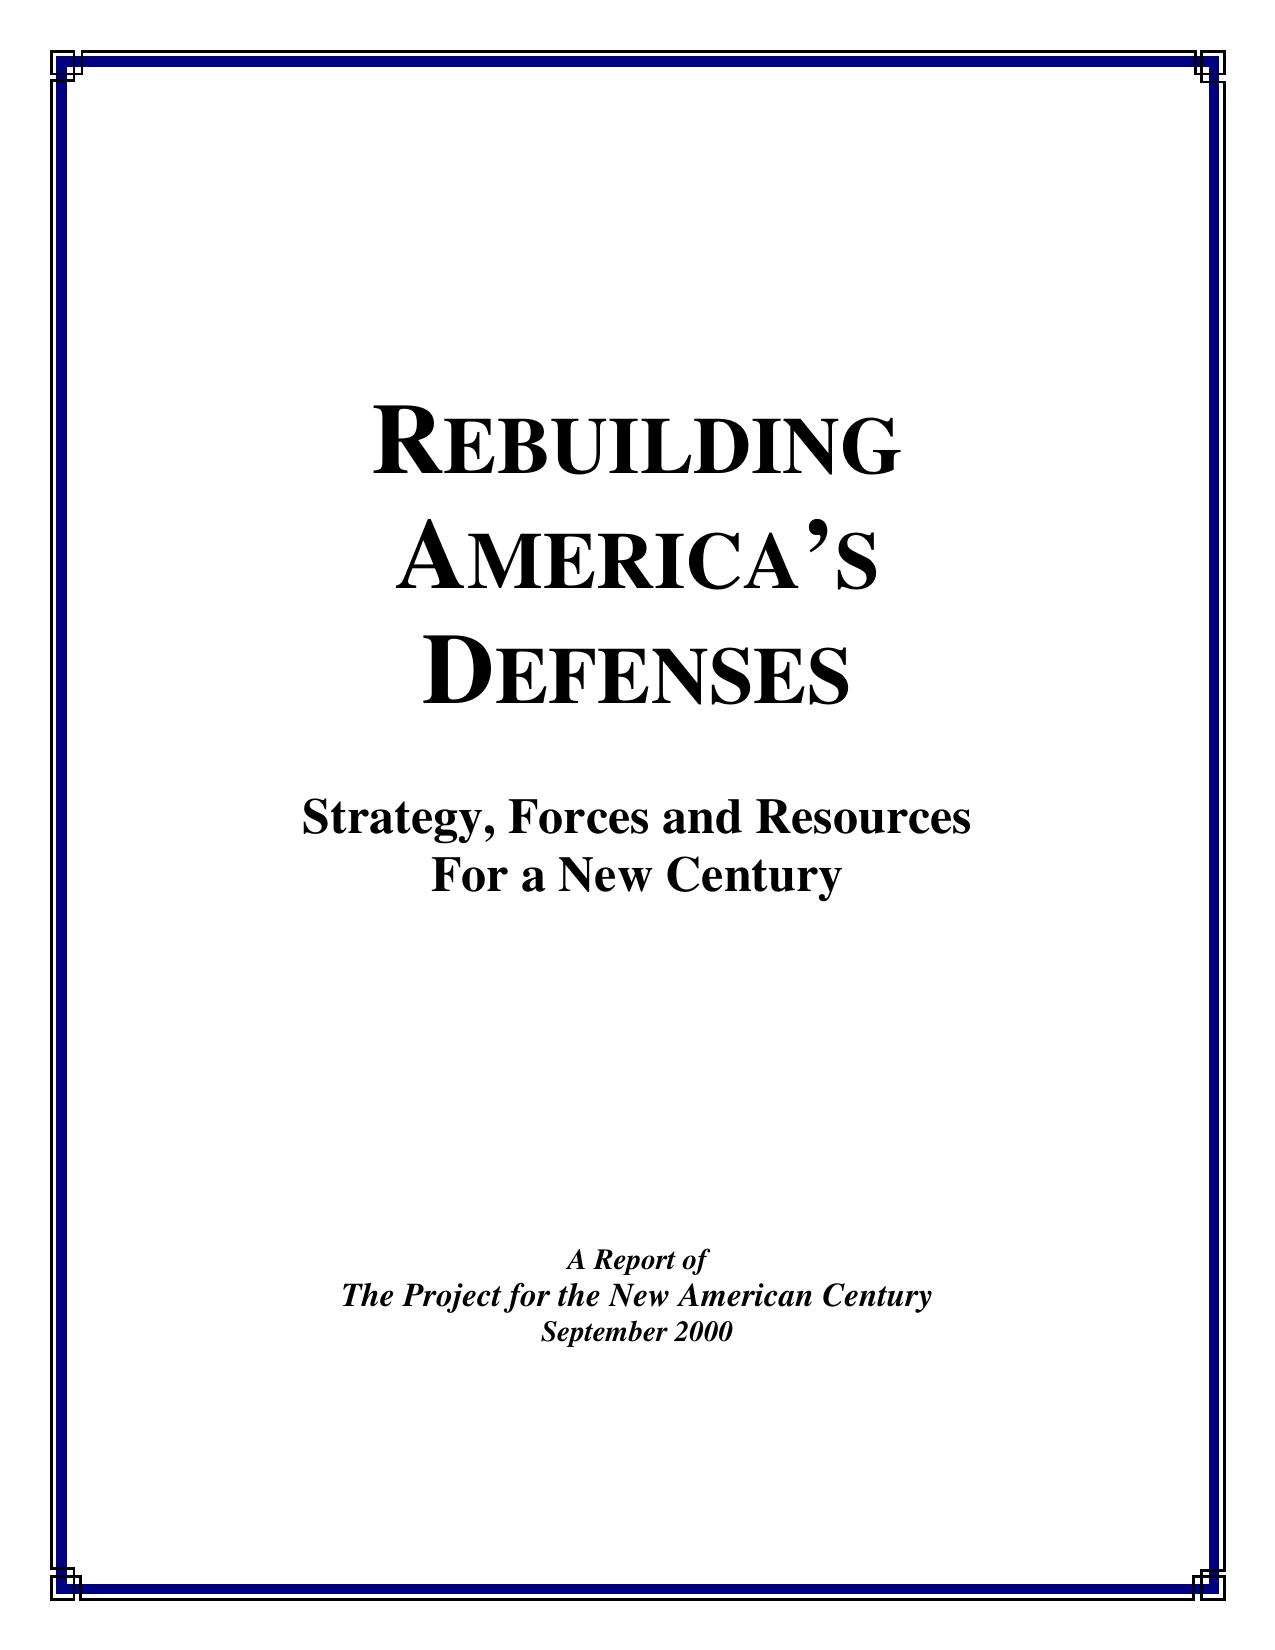 Rebuilding America's Defenses: Strategy, Forces and Resources for a New Century